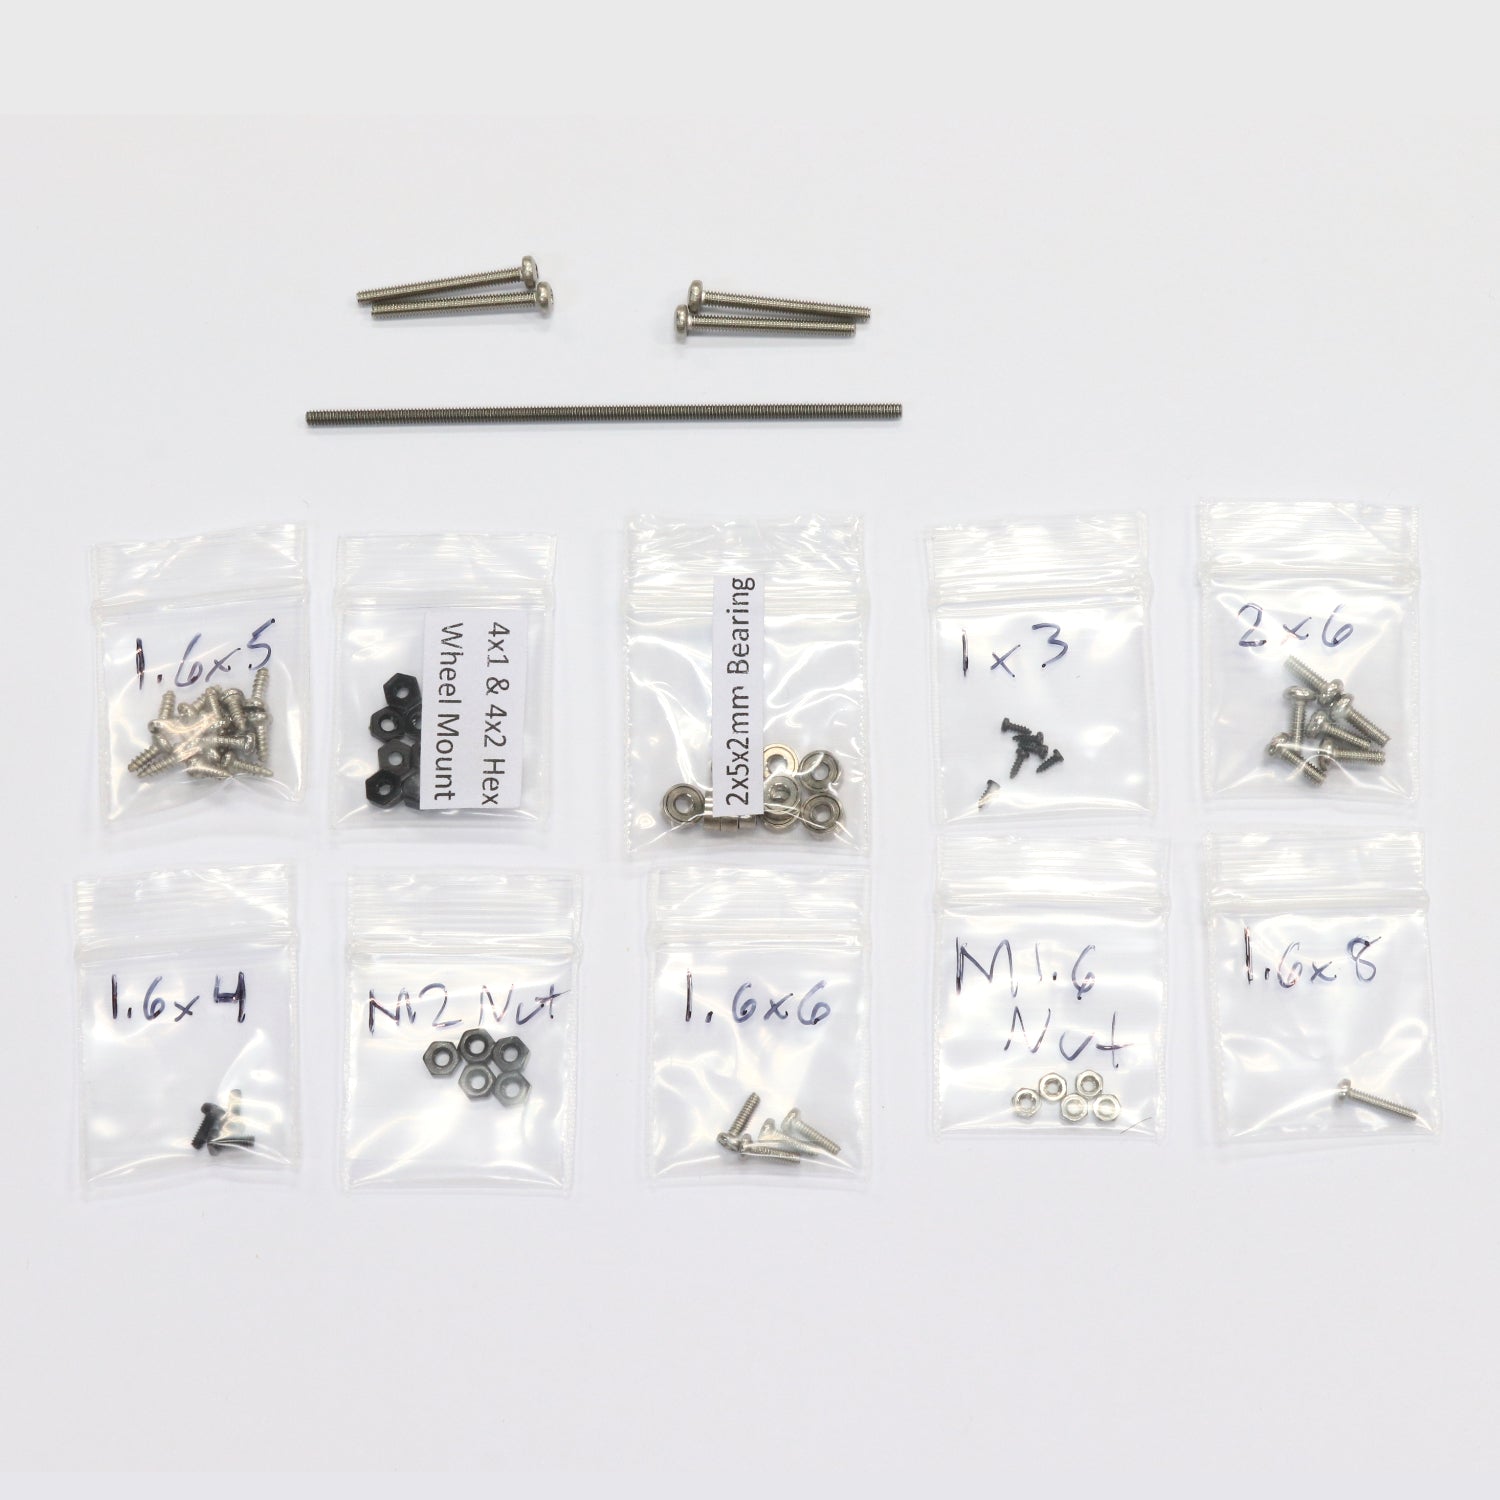 Hardware Kit for Make It RC FP UC1 Chassis